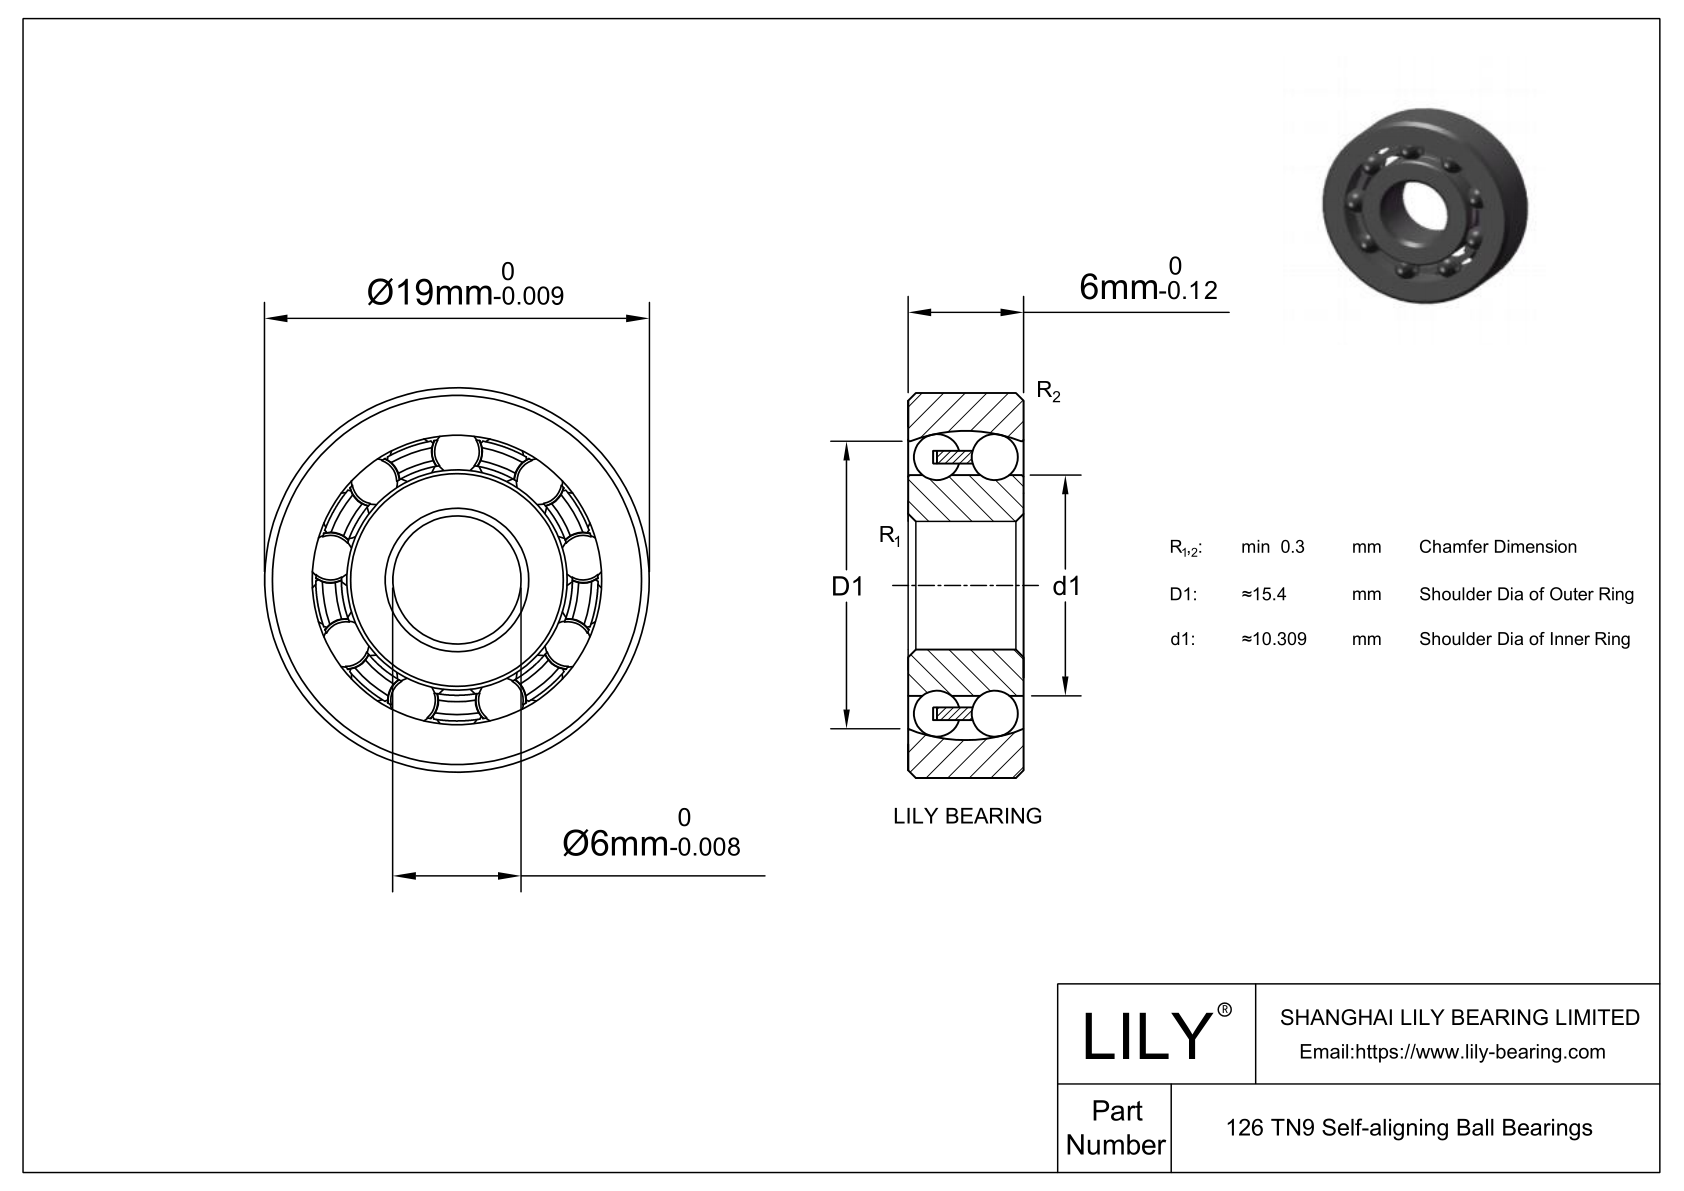 CE126SI Silicon Nitride Self Aligning Ball Bearings cad drawing